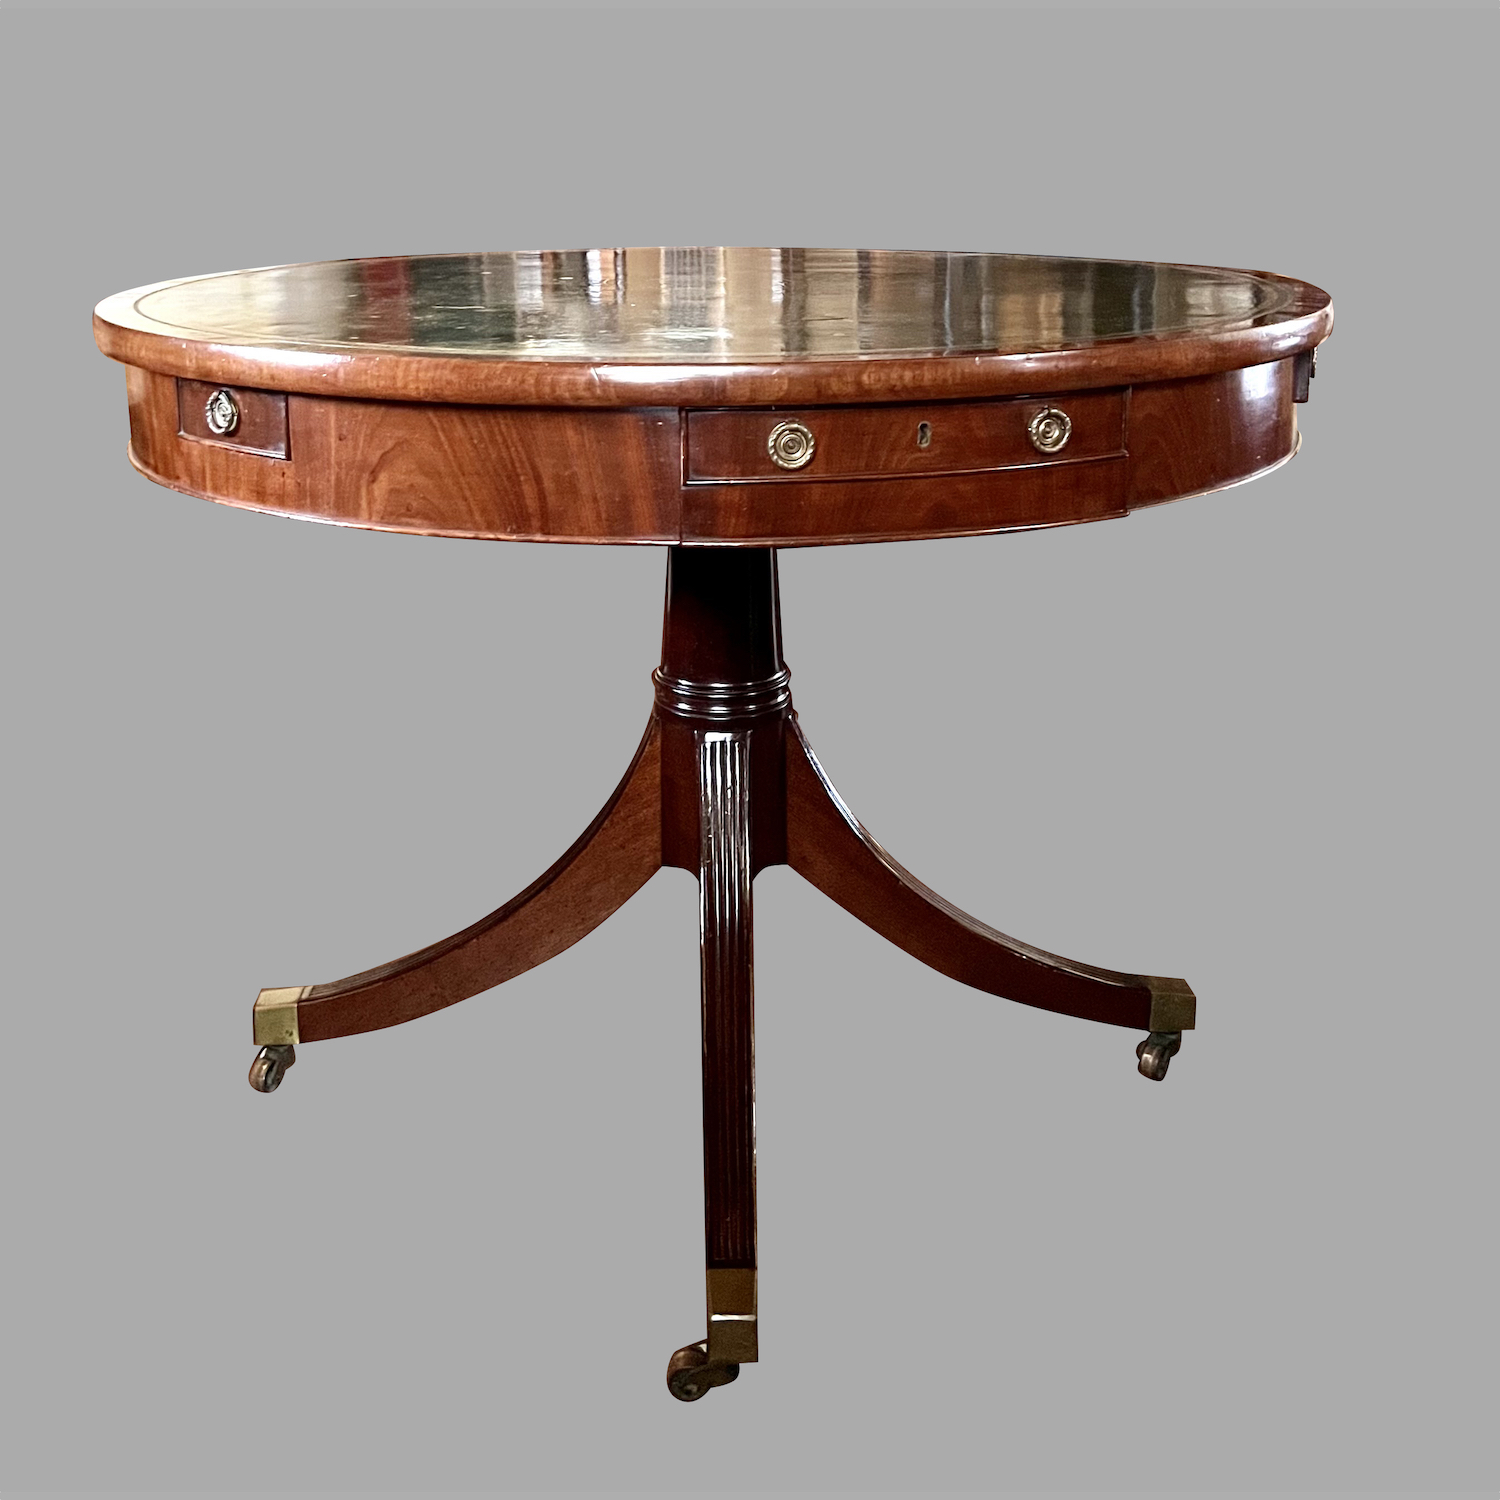 english-regency-style-mahogany-drum-table-with-rotating-gilt-tooled-leather-top-c322-11